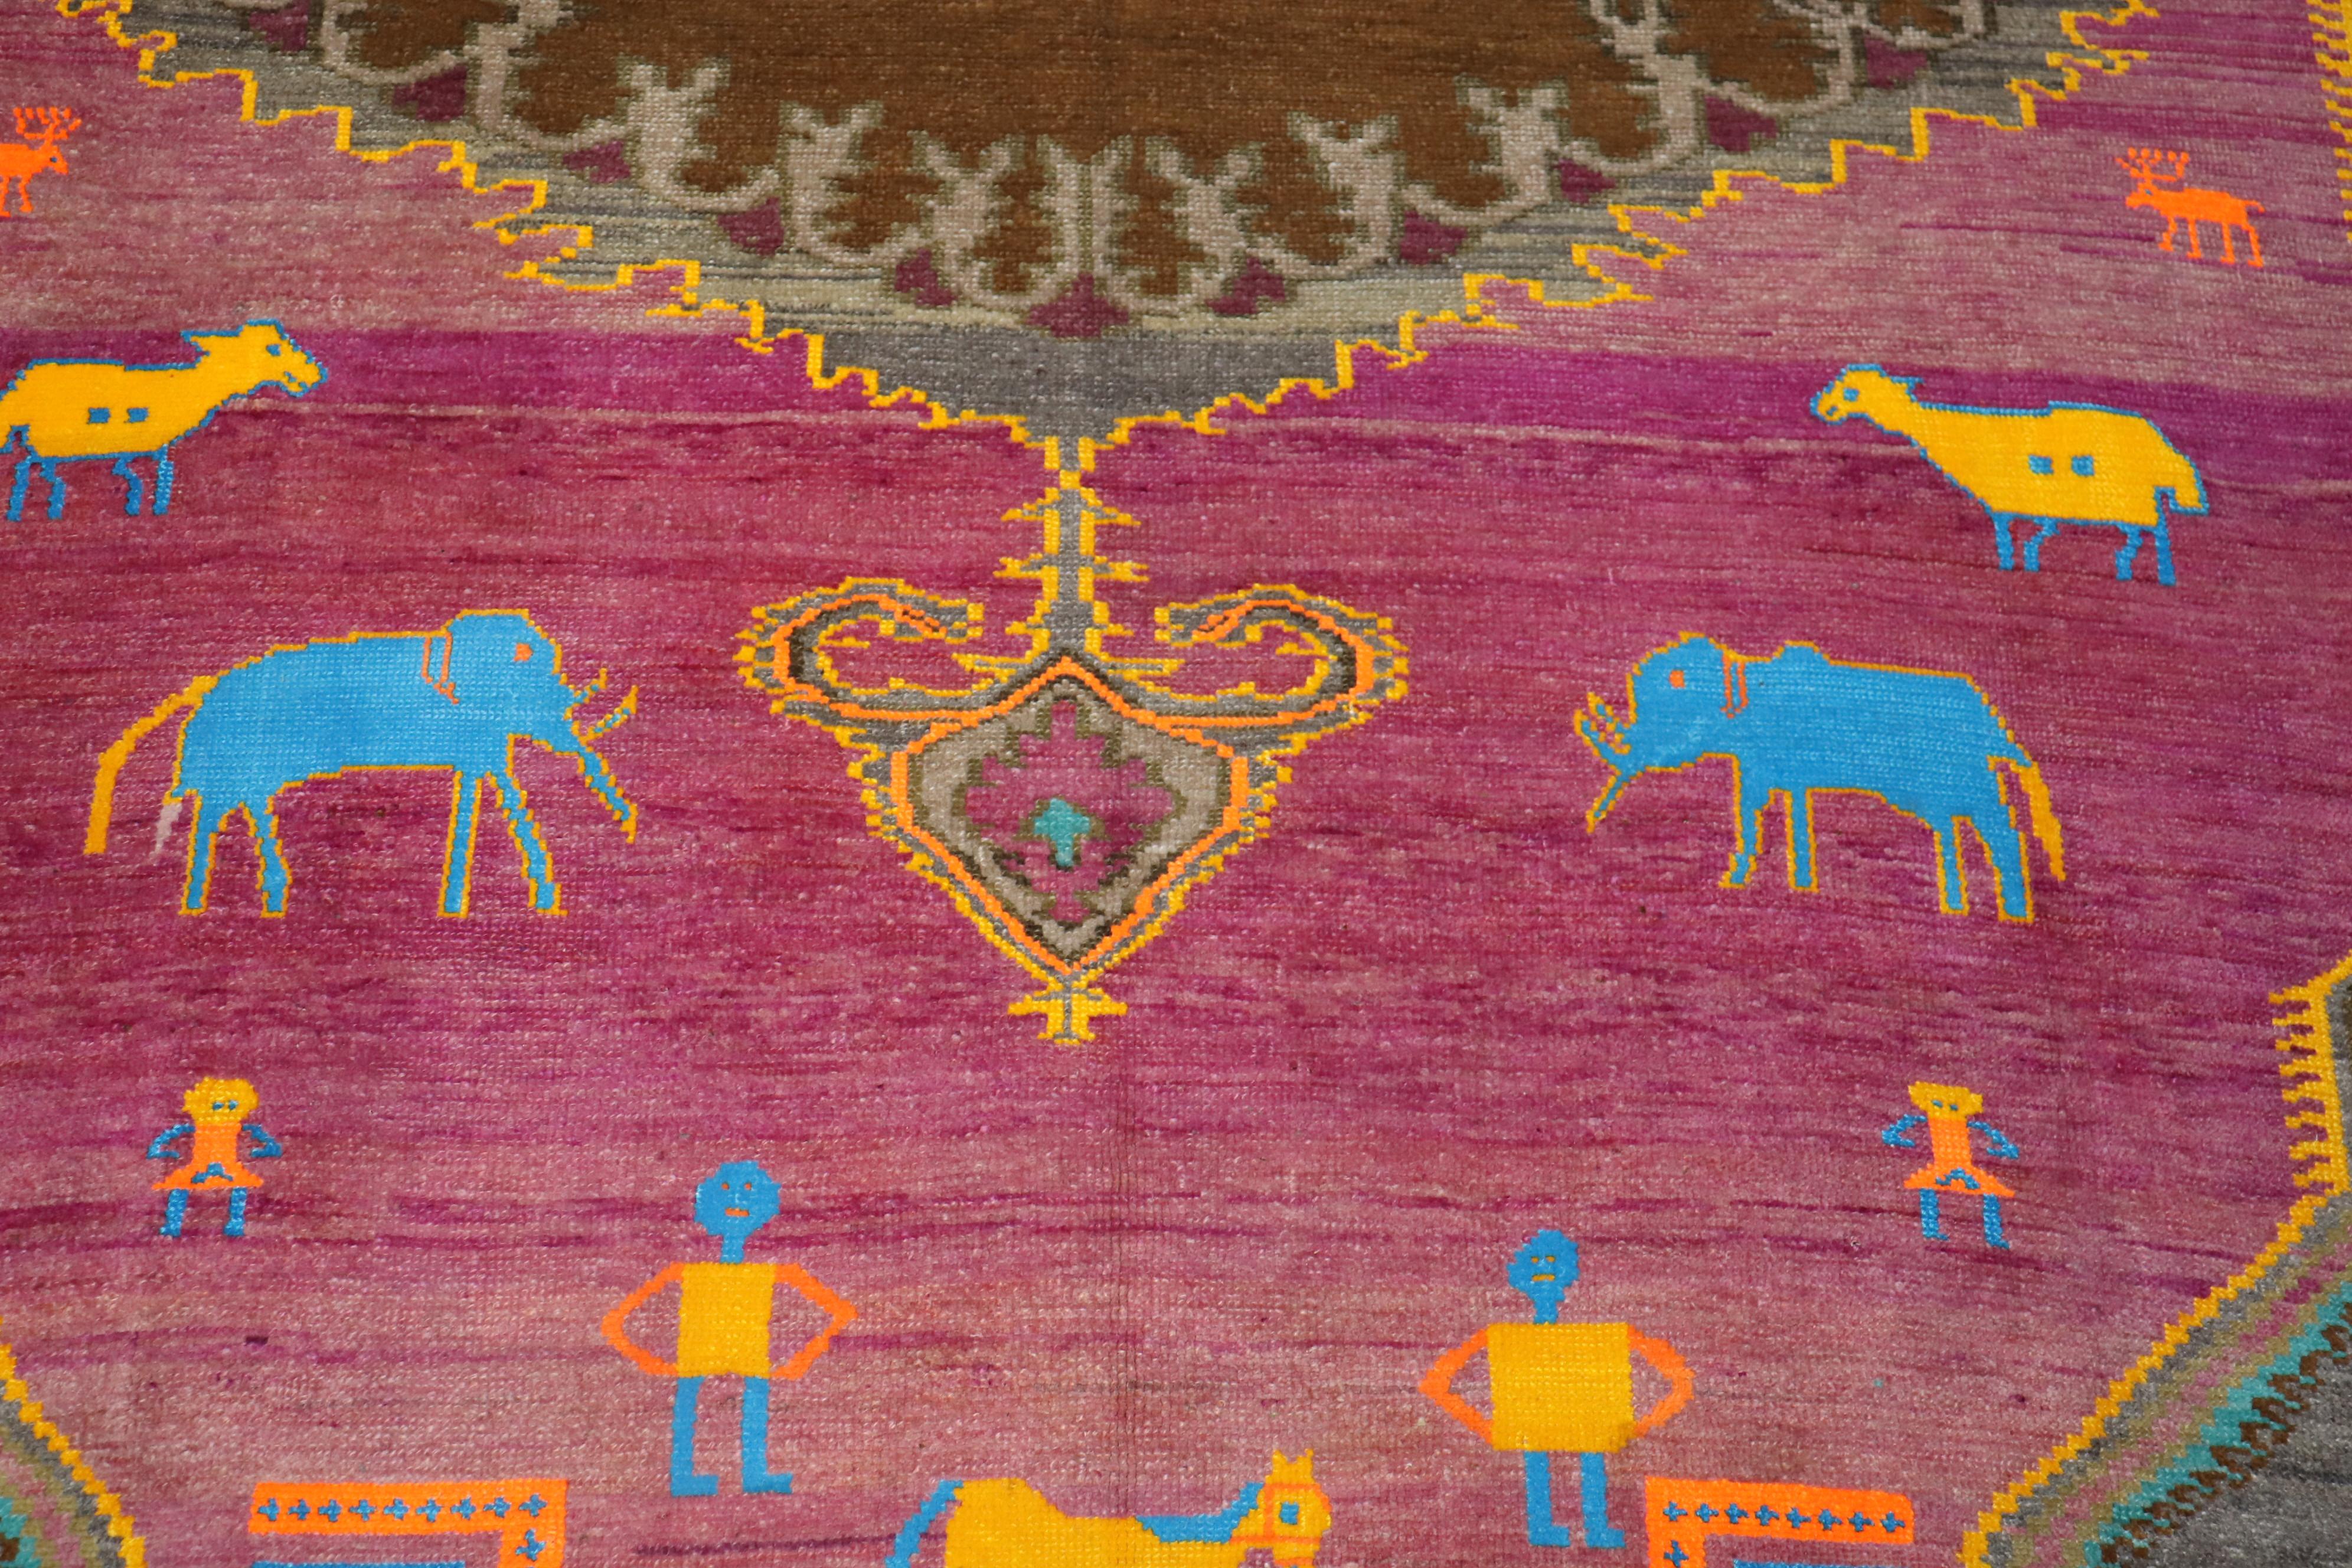 One of a kind whimsical Turkish Animal Human figurative Motif on a fuchsia ground. This rug is from the middle of the 20th century. Elephants, horses, humans floating all-over the field in vivid yellow and bright blue.
A statement piece that just